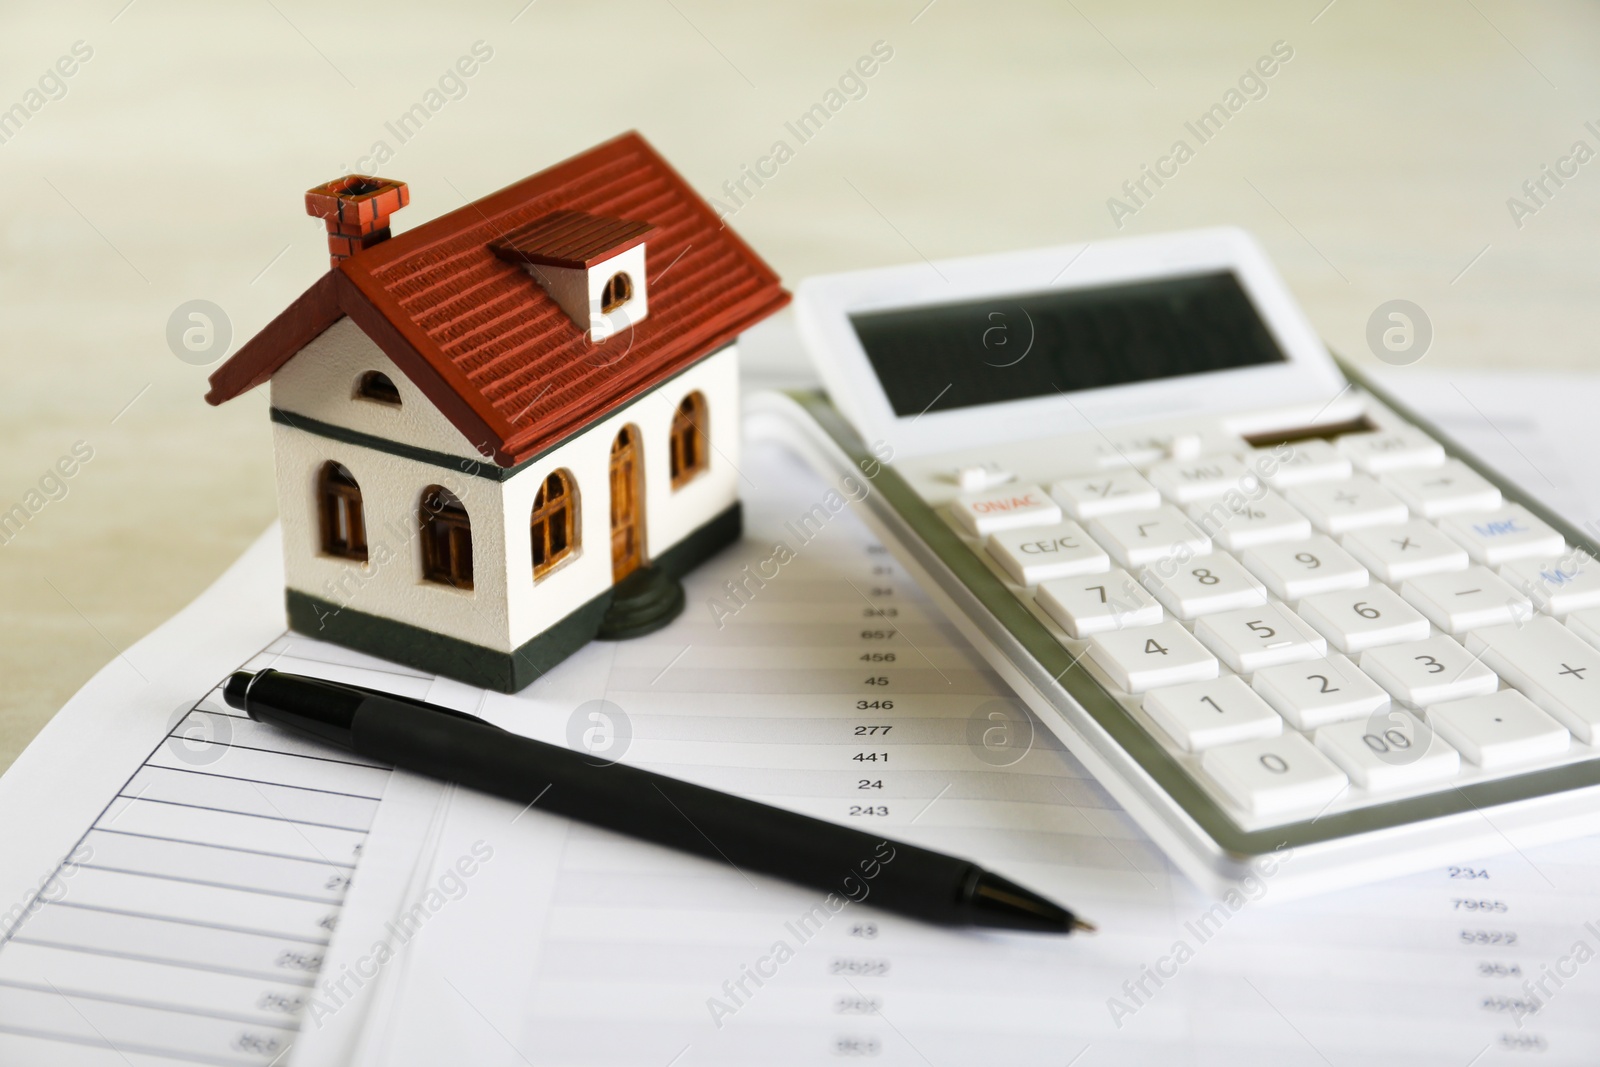 Photo of Calculator, house model, pen and documents on light table. Real estate agent's workplace